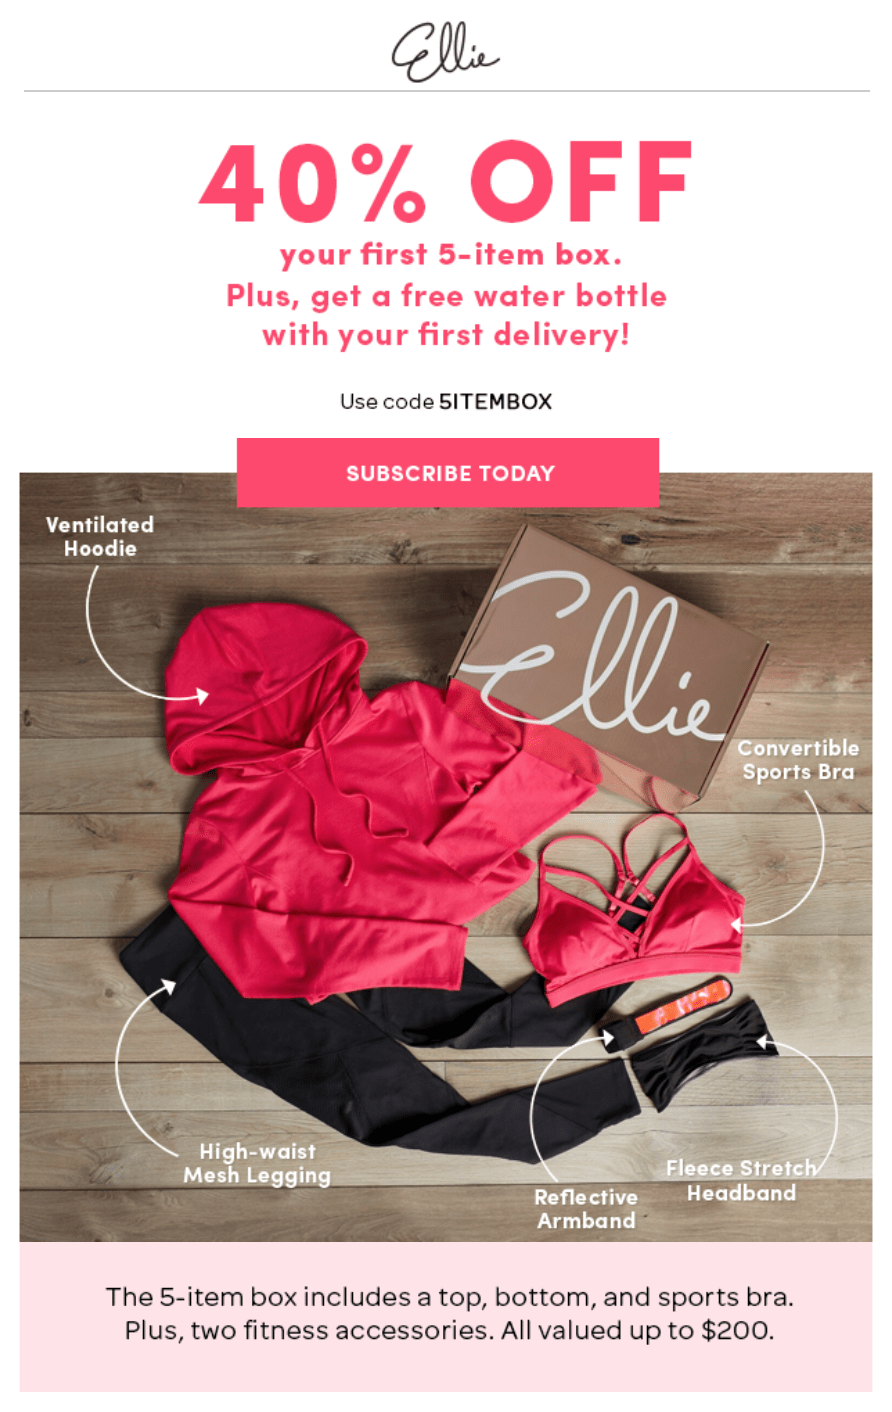 Ellie Coupon Code – Save 40% Off Your First Month + Free Water Bottle